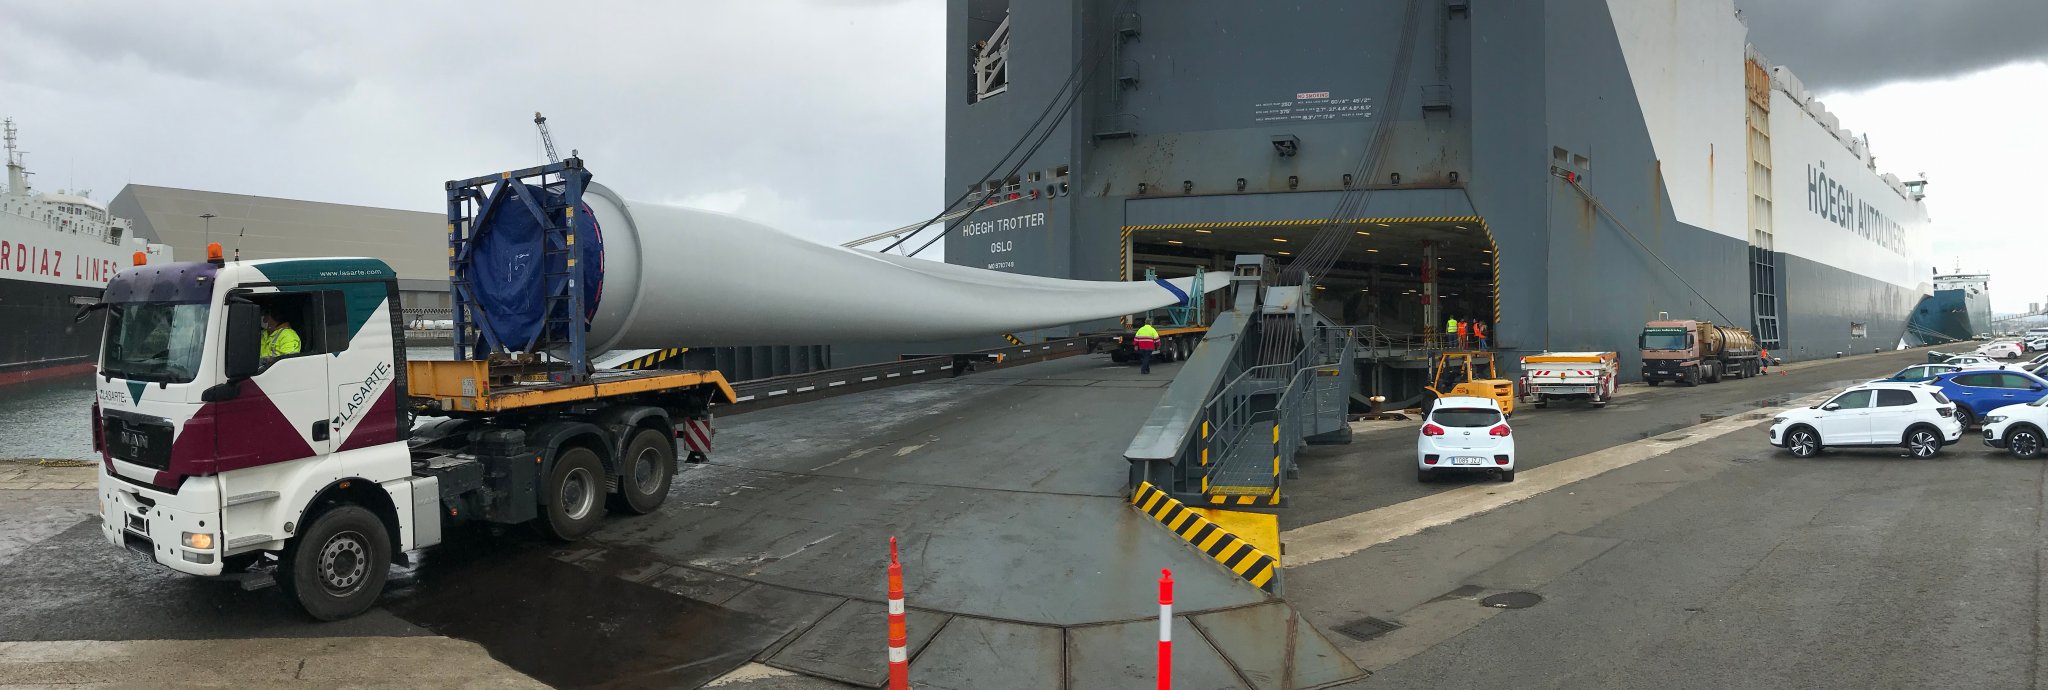 45-metre long rotor blades shipped by Höegh Autoliners for renewable energy project